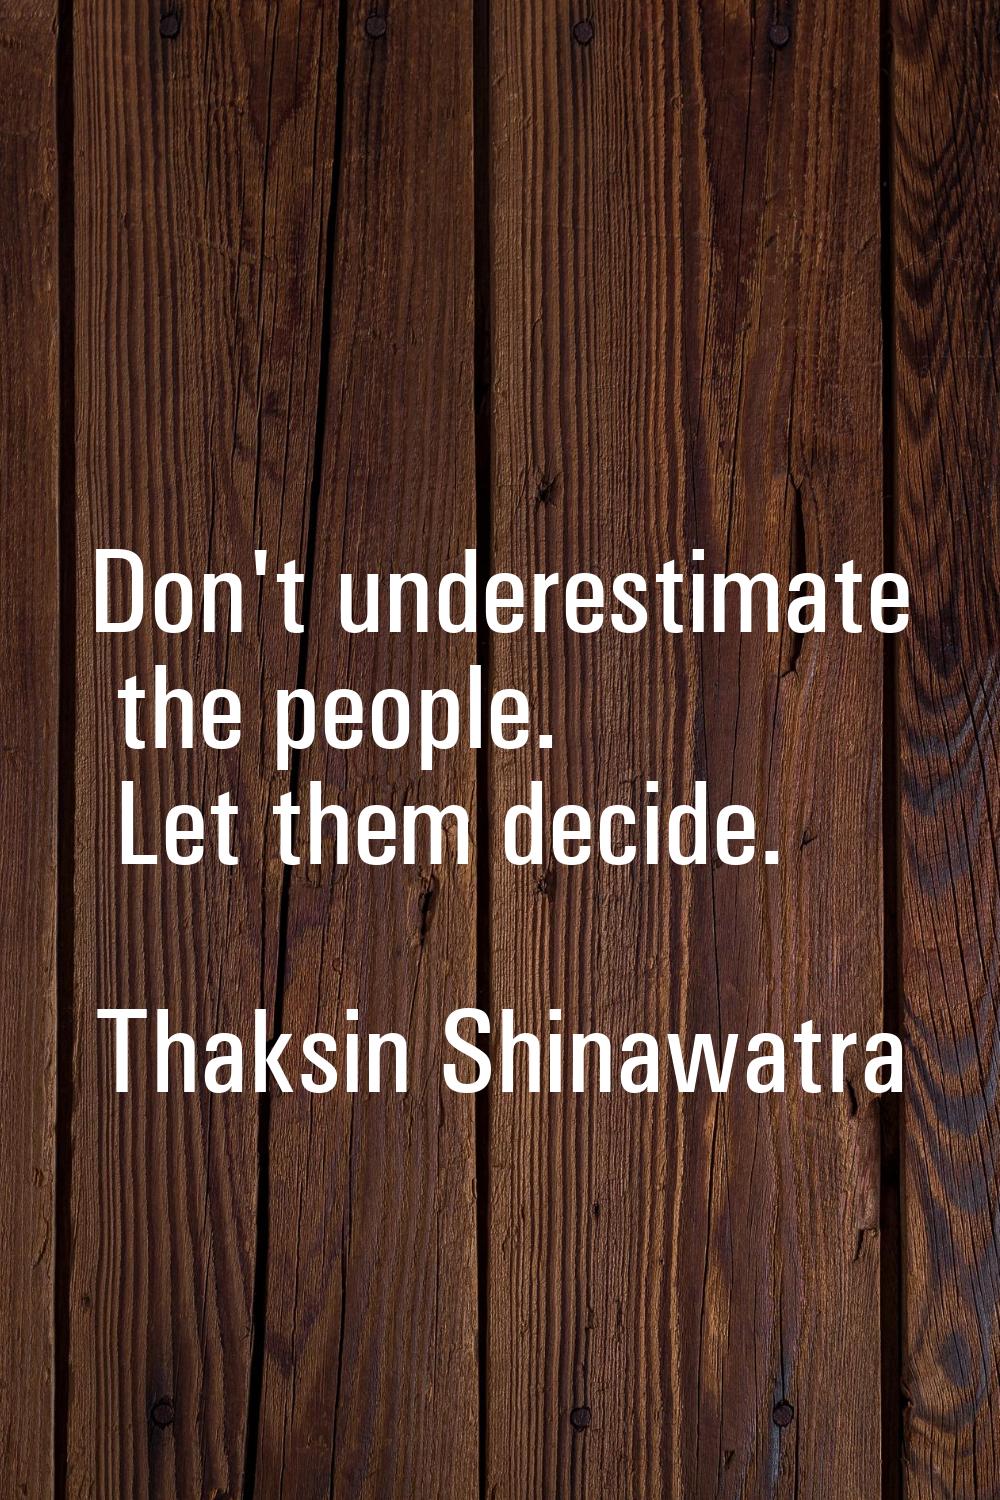 Don't underestimate the people. Let them decide.